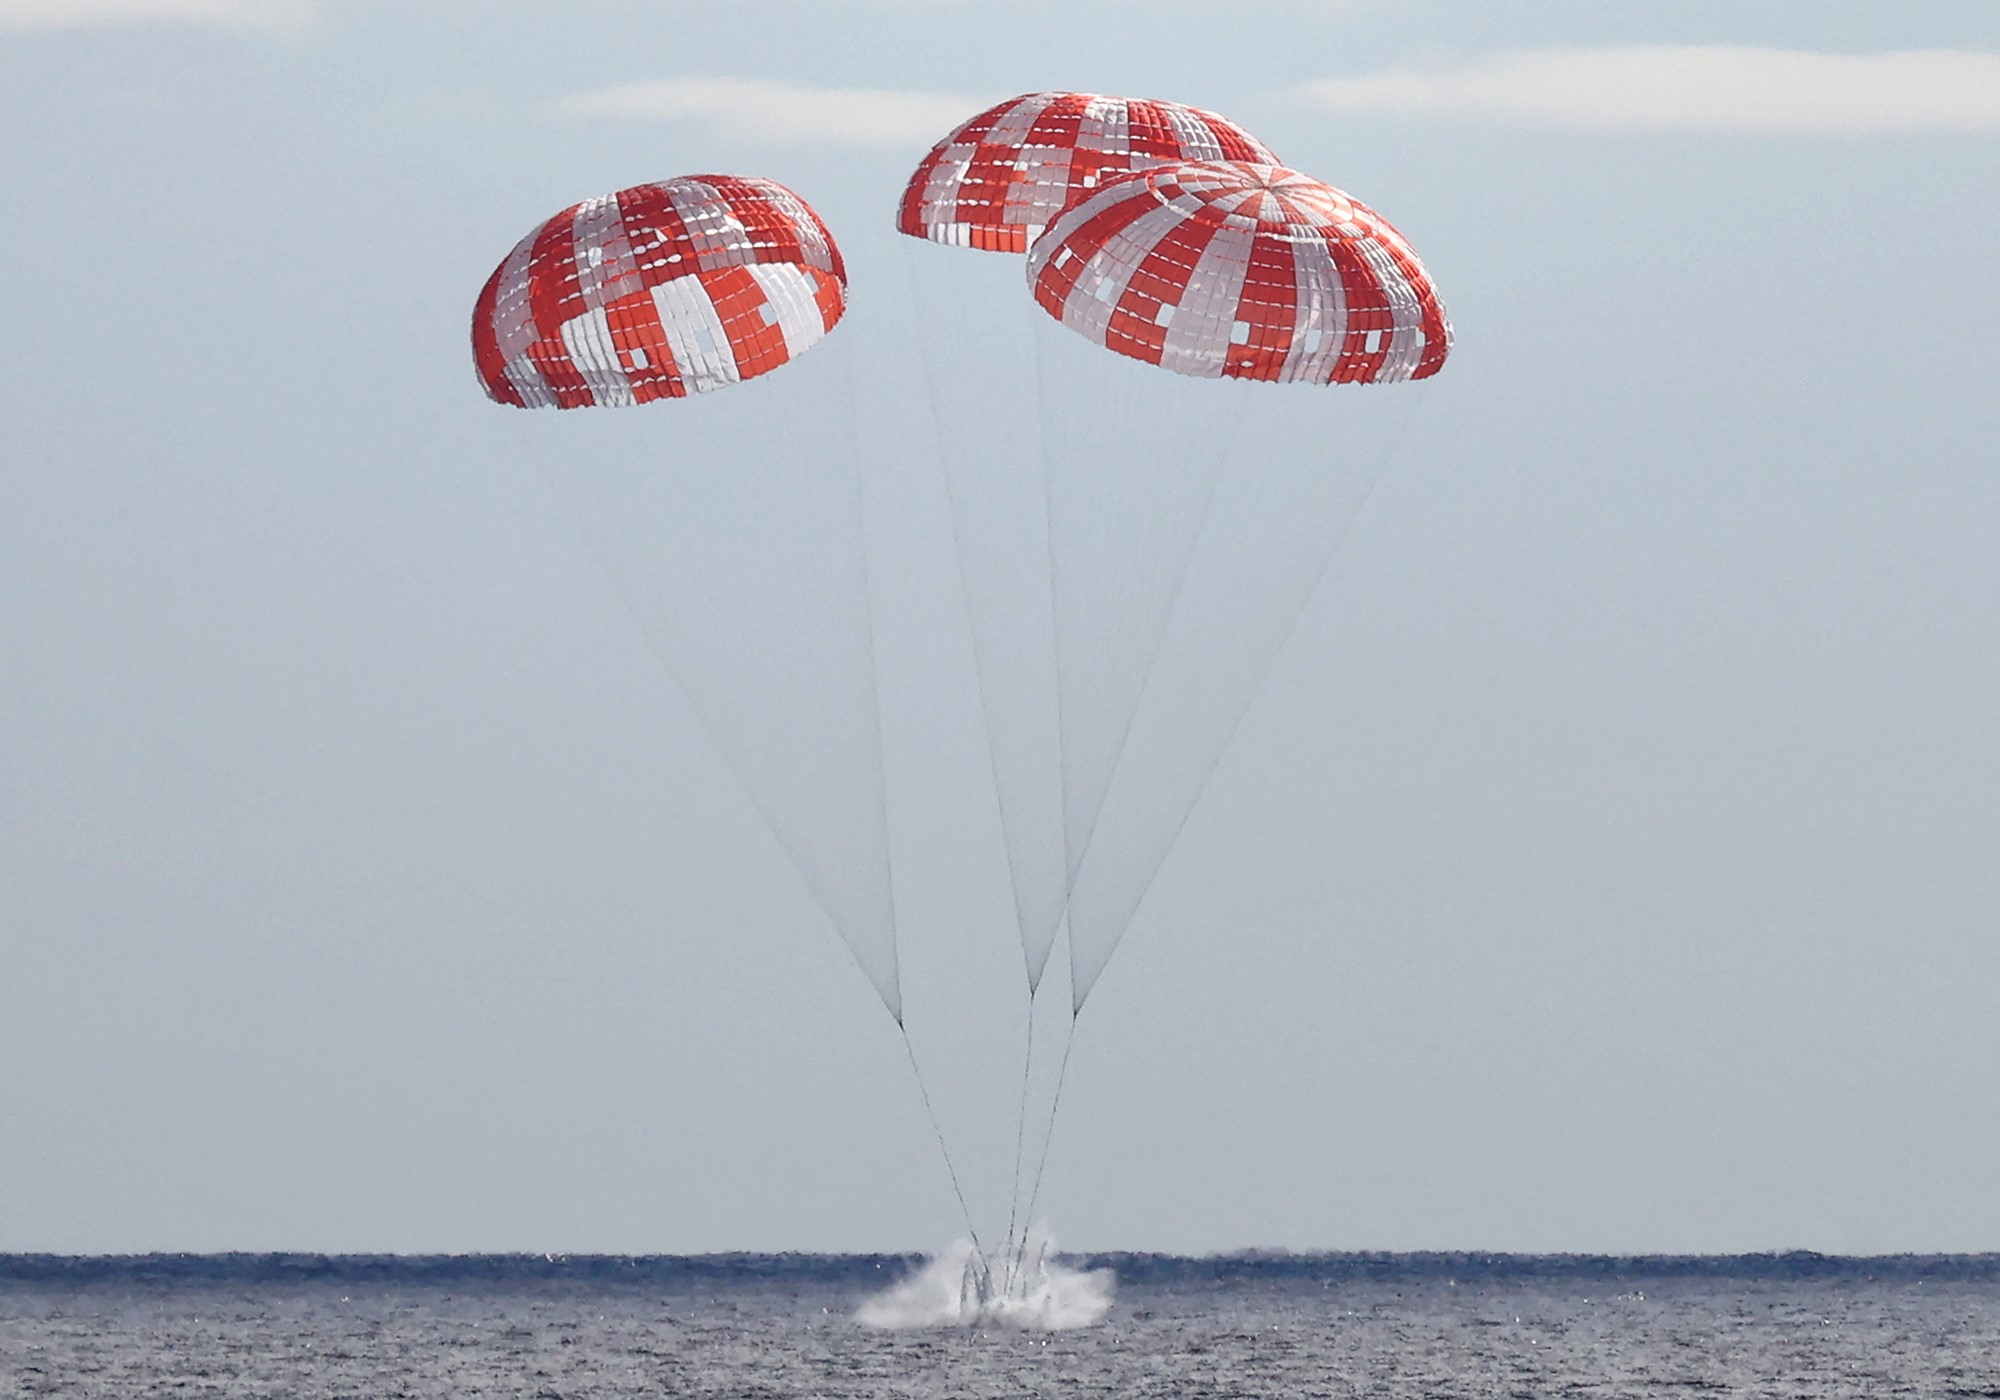 The Orion capsule splashes into the ocean with three large parachutes hanging off it. 